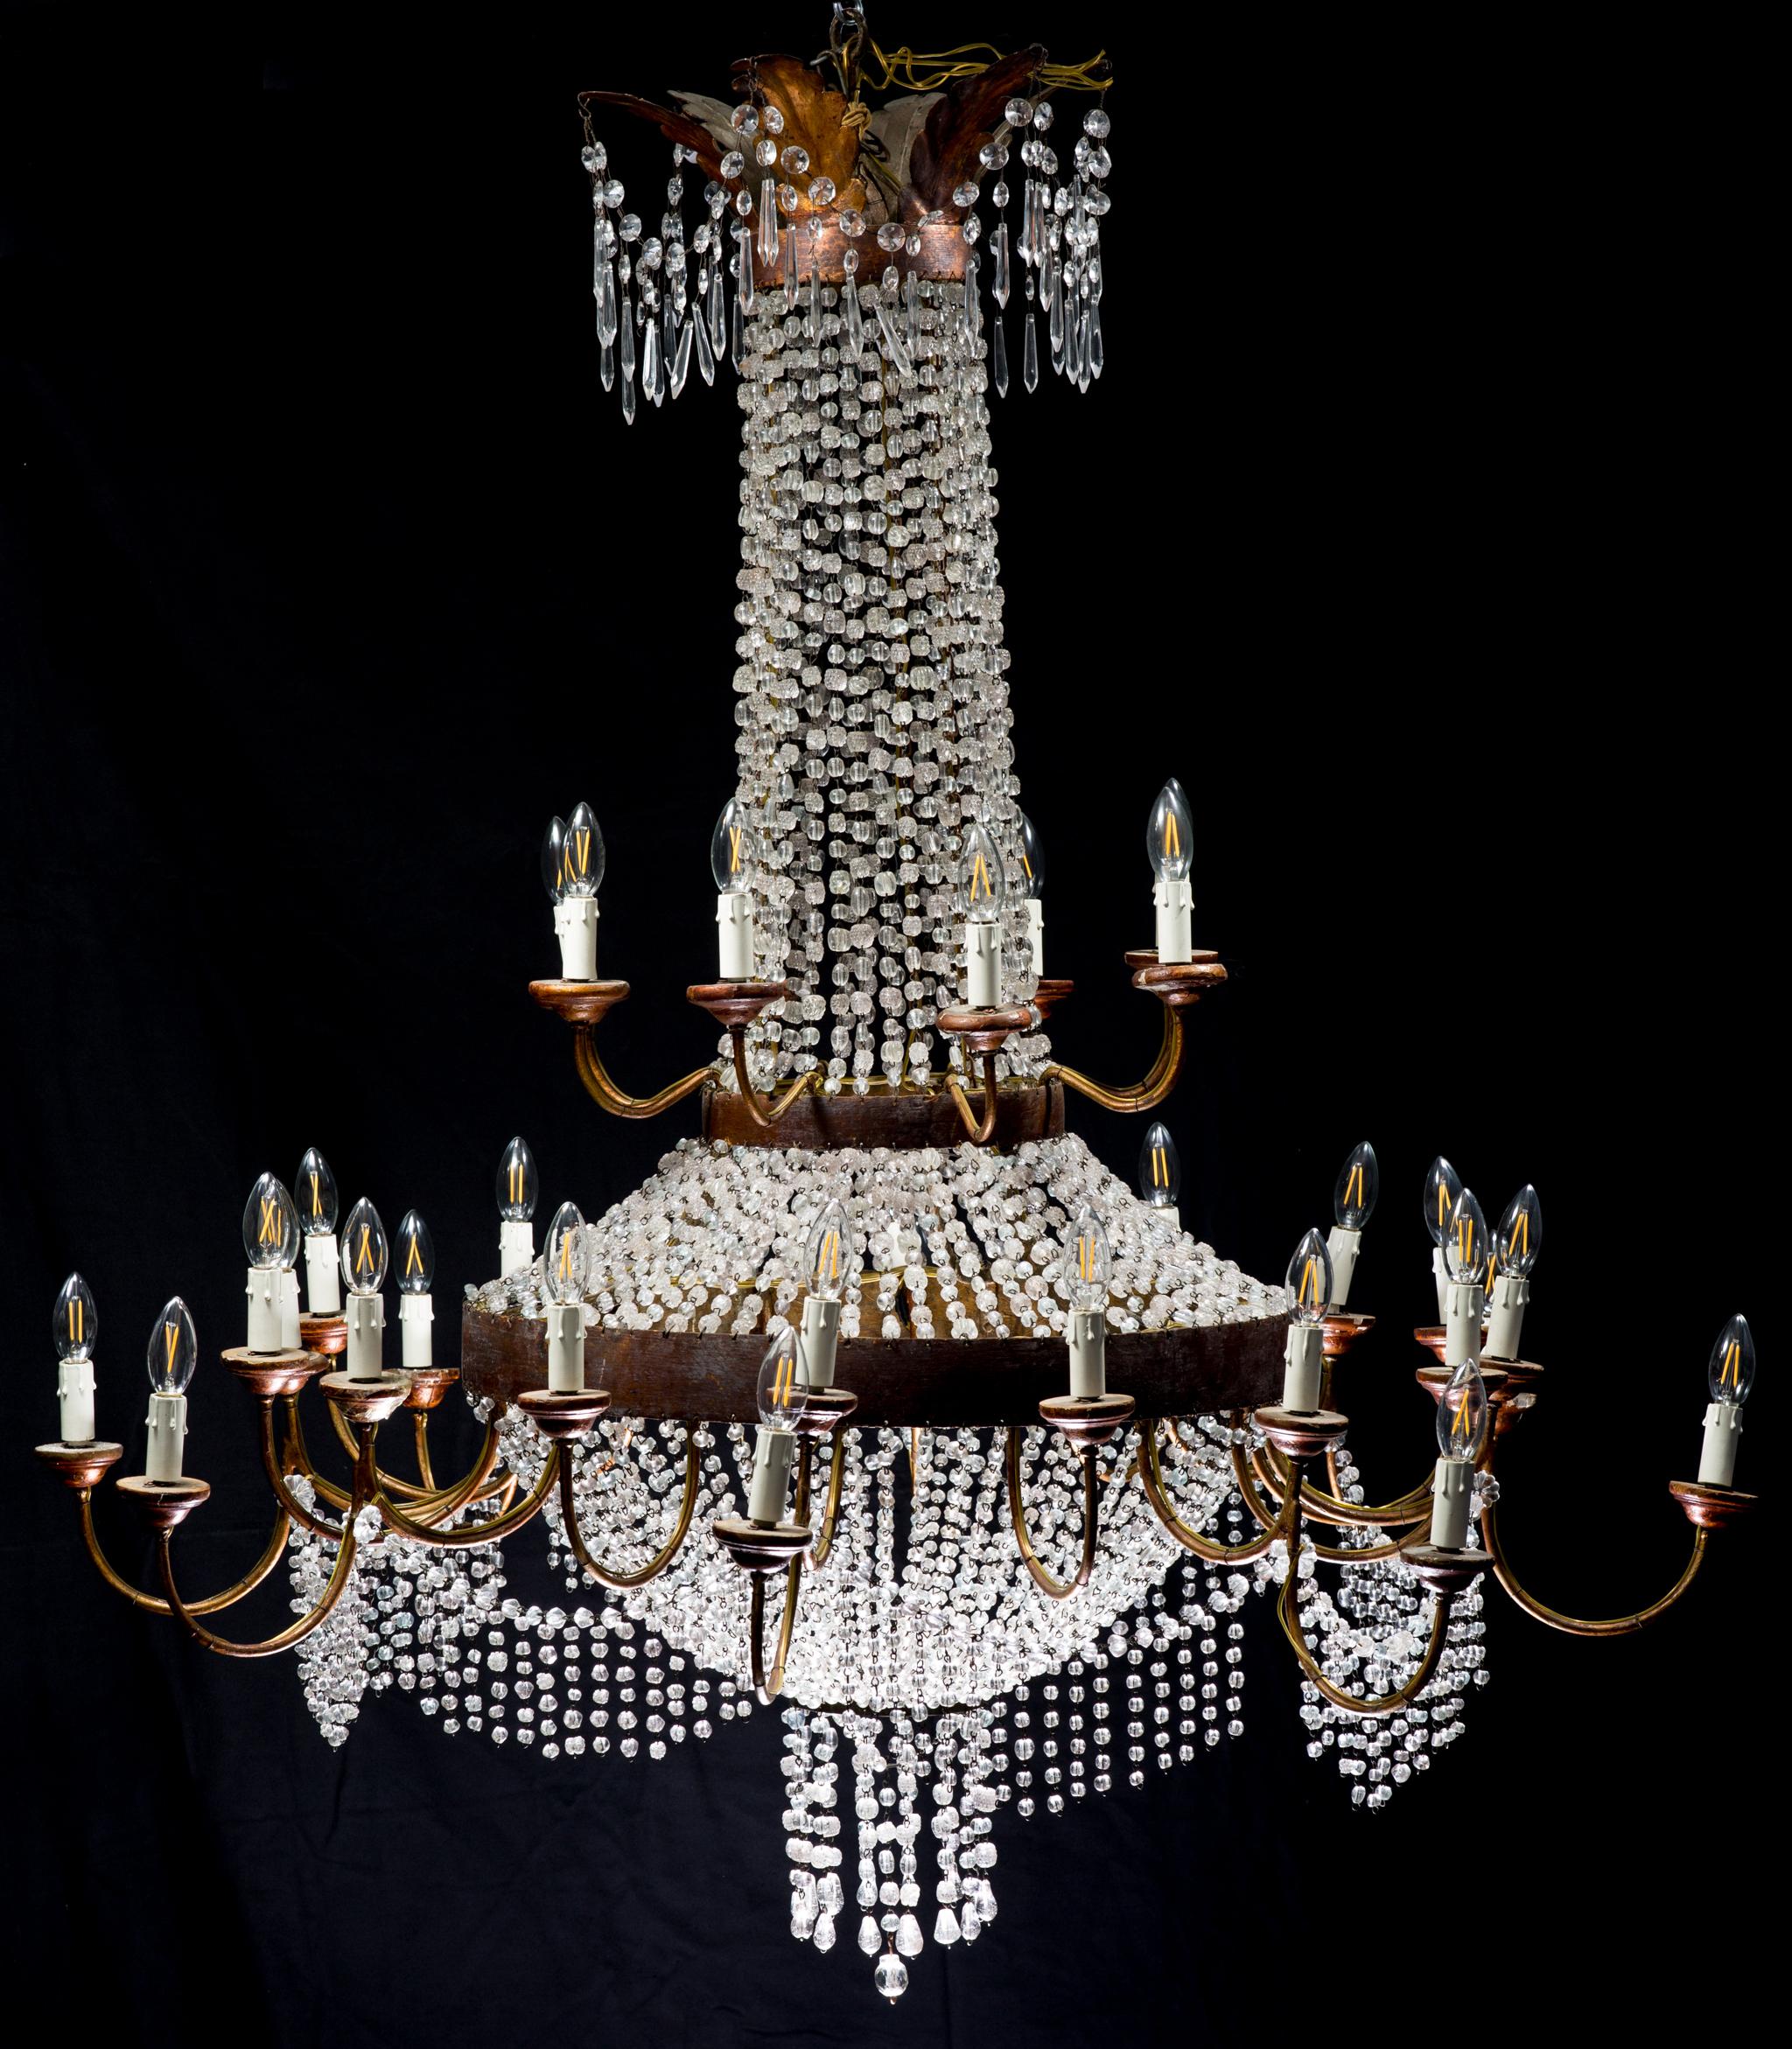 A very impressive Baroque-style chandelier with crystals and 34 lightbulbs from Italy made at the beginning of the 20th century. This huge chandelier consists of three levels which are divided by iron rings. The dressing of the chandelier is